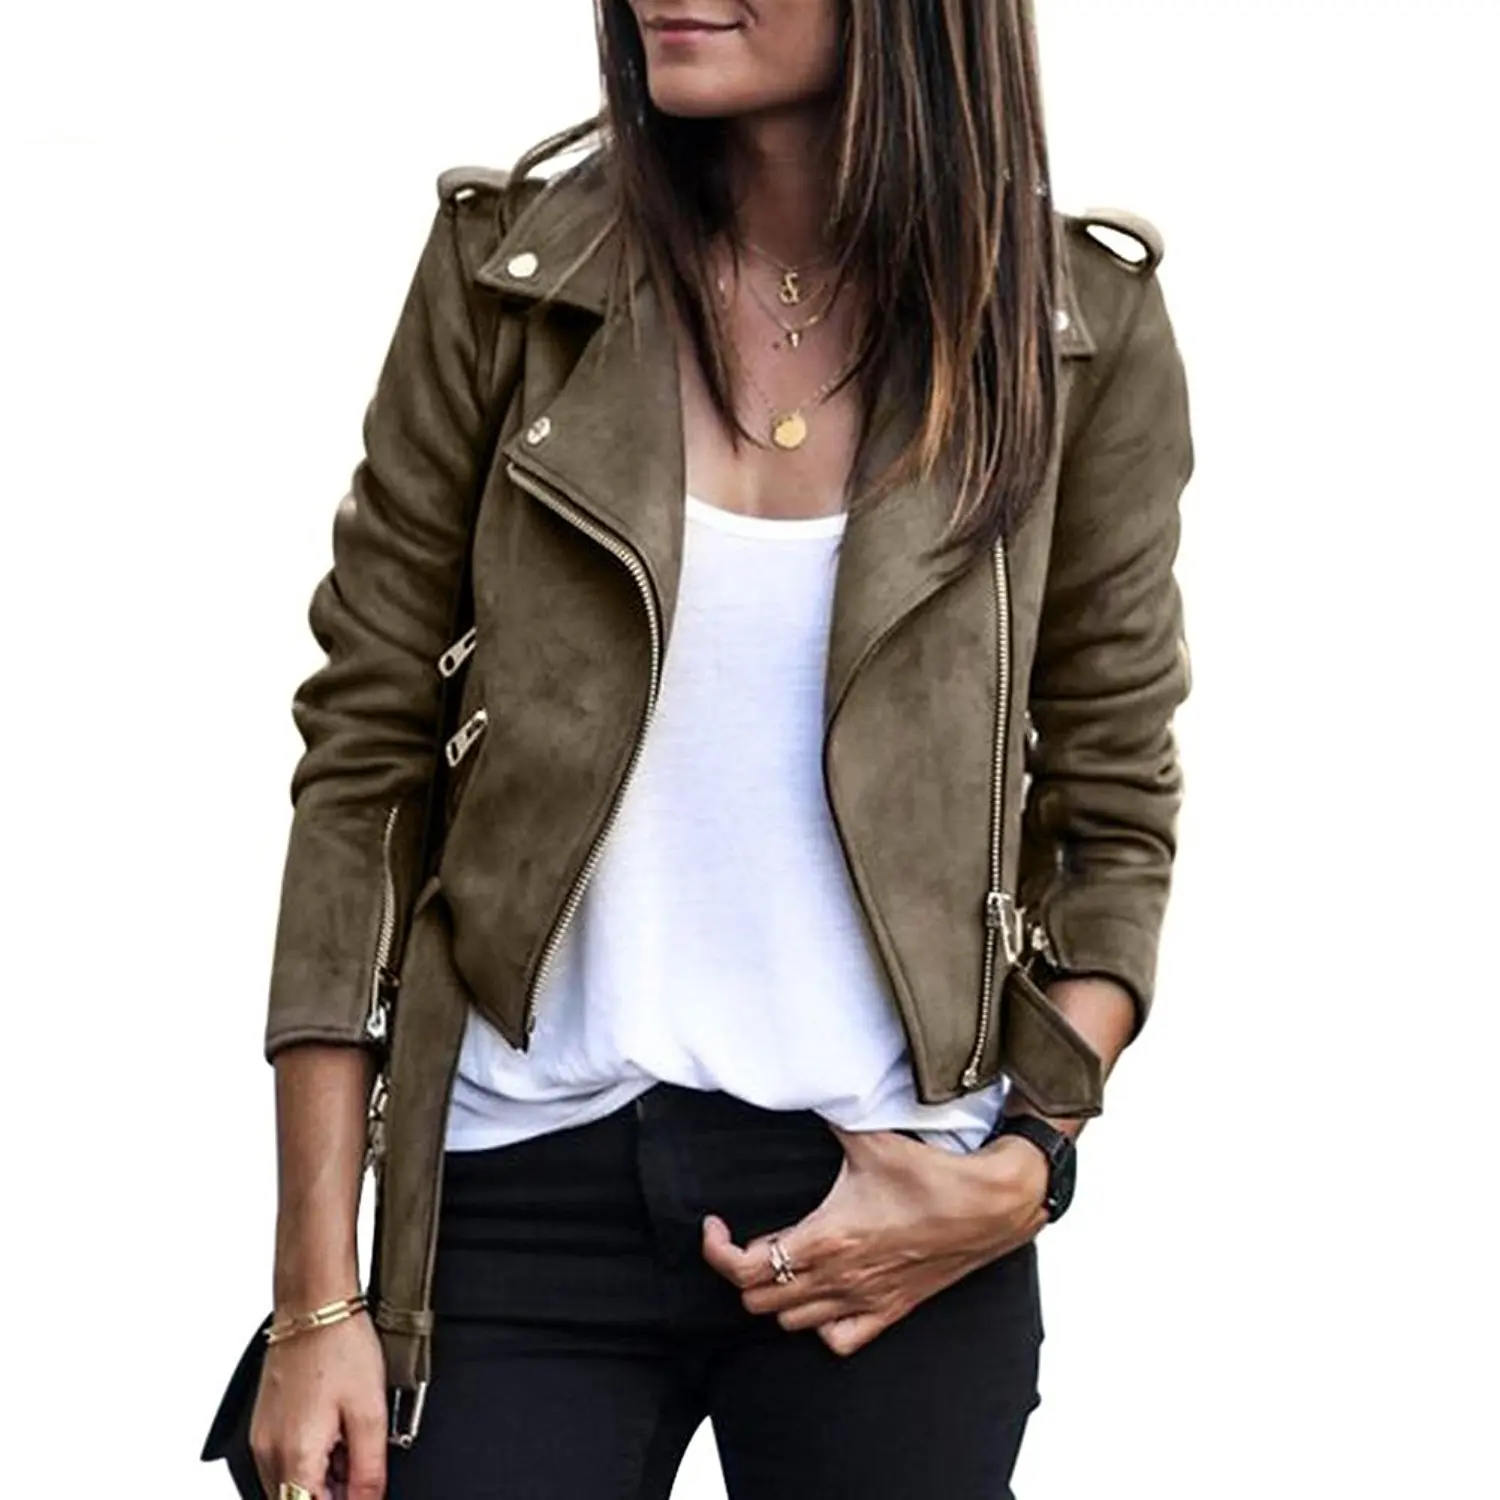 Cheap Cool Jackets, find Cool Jackets deals on line at Alibaba.com